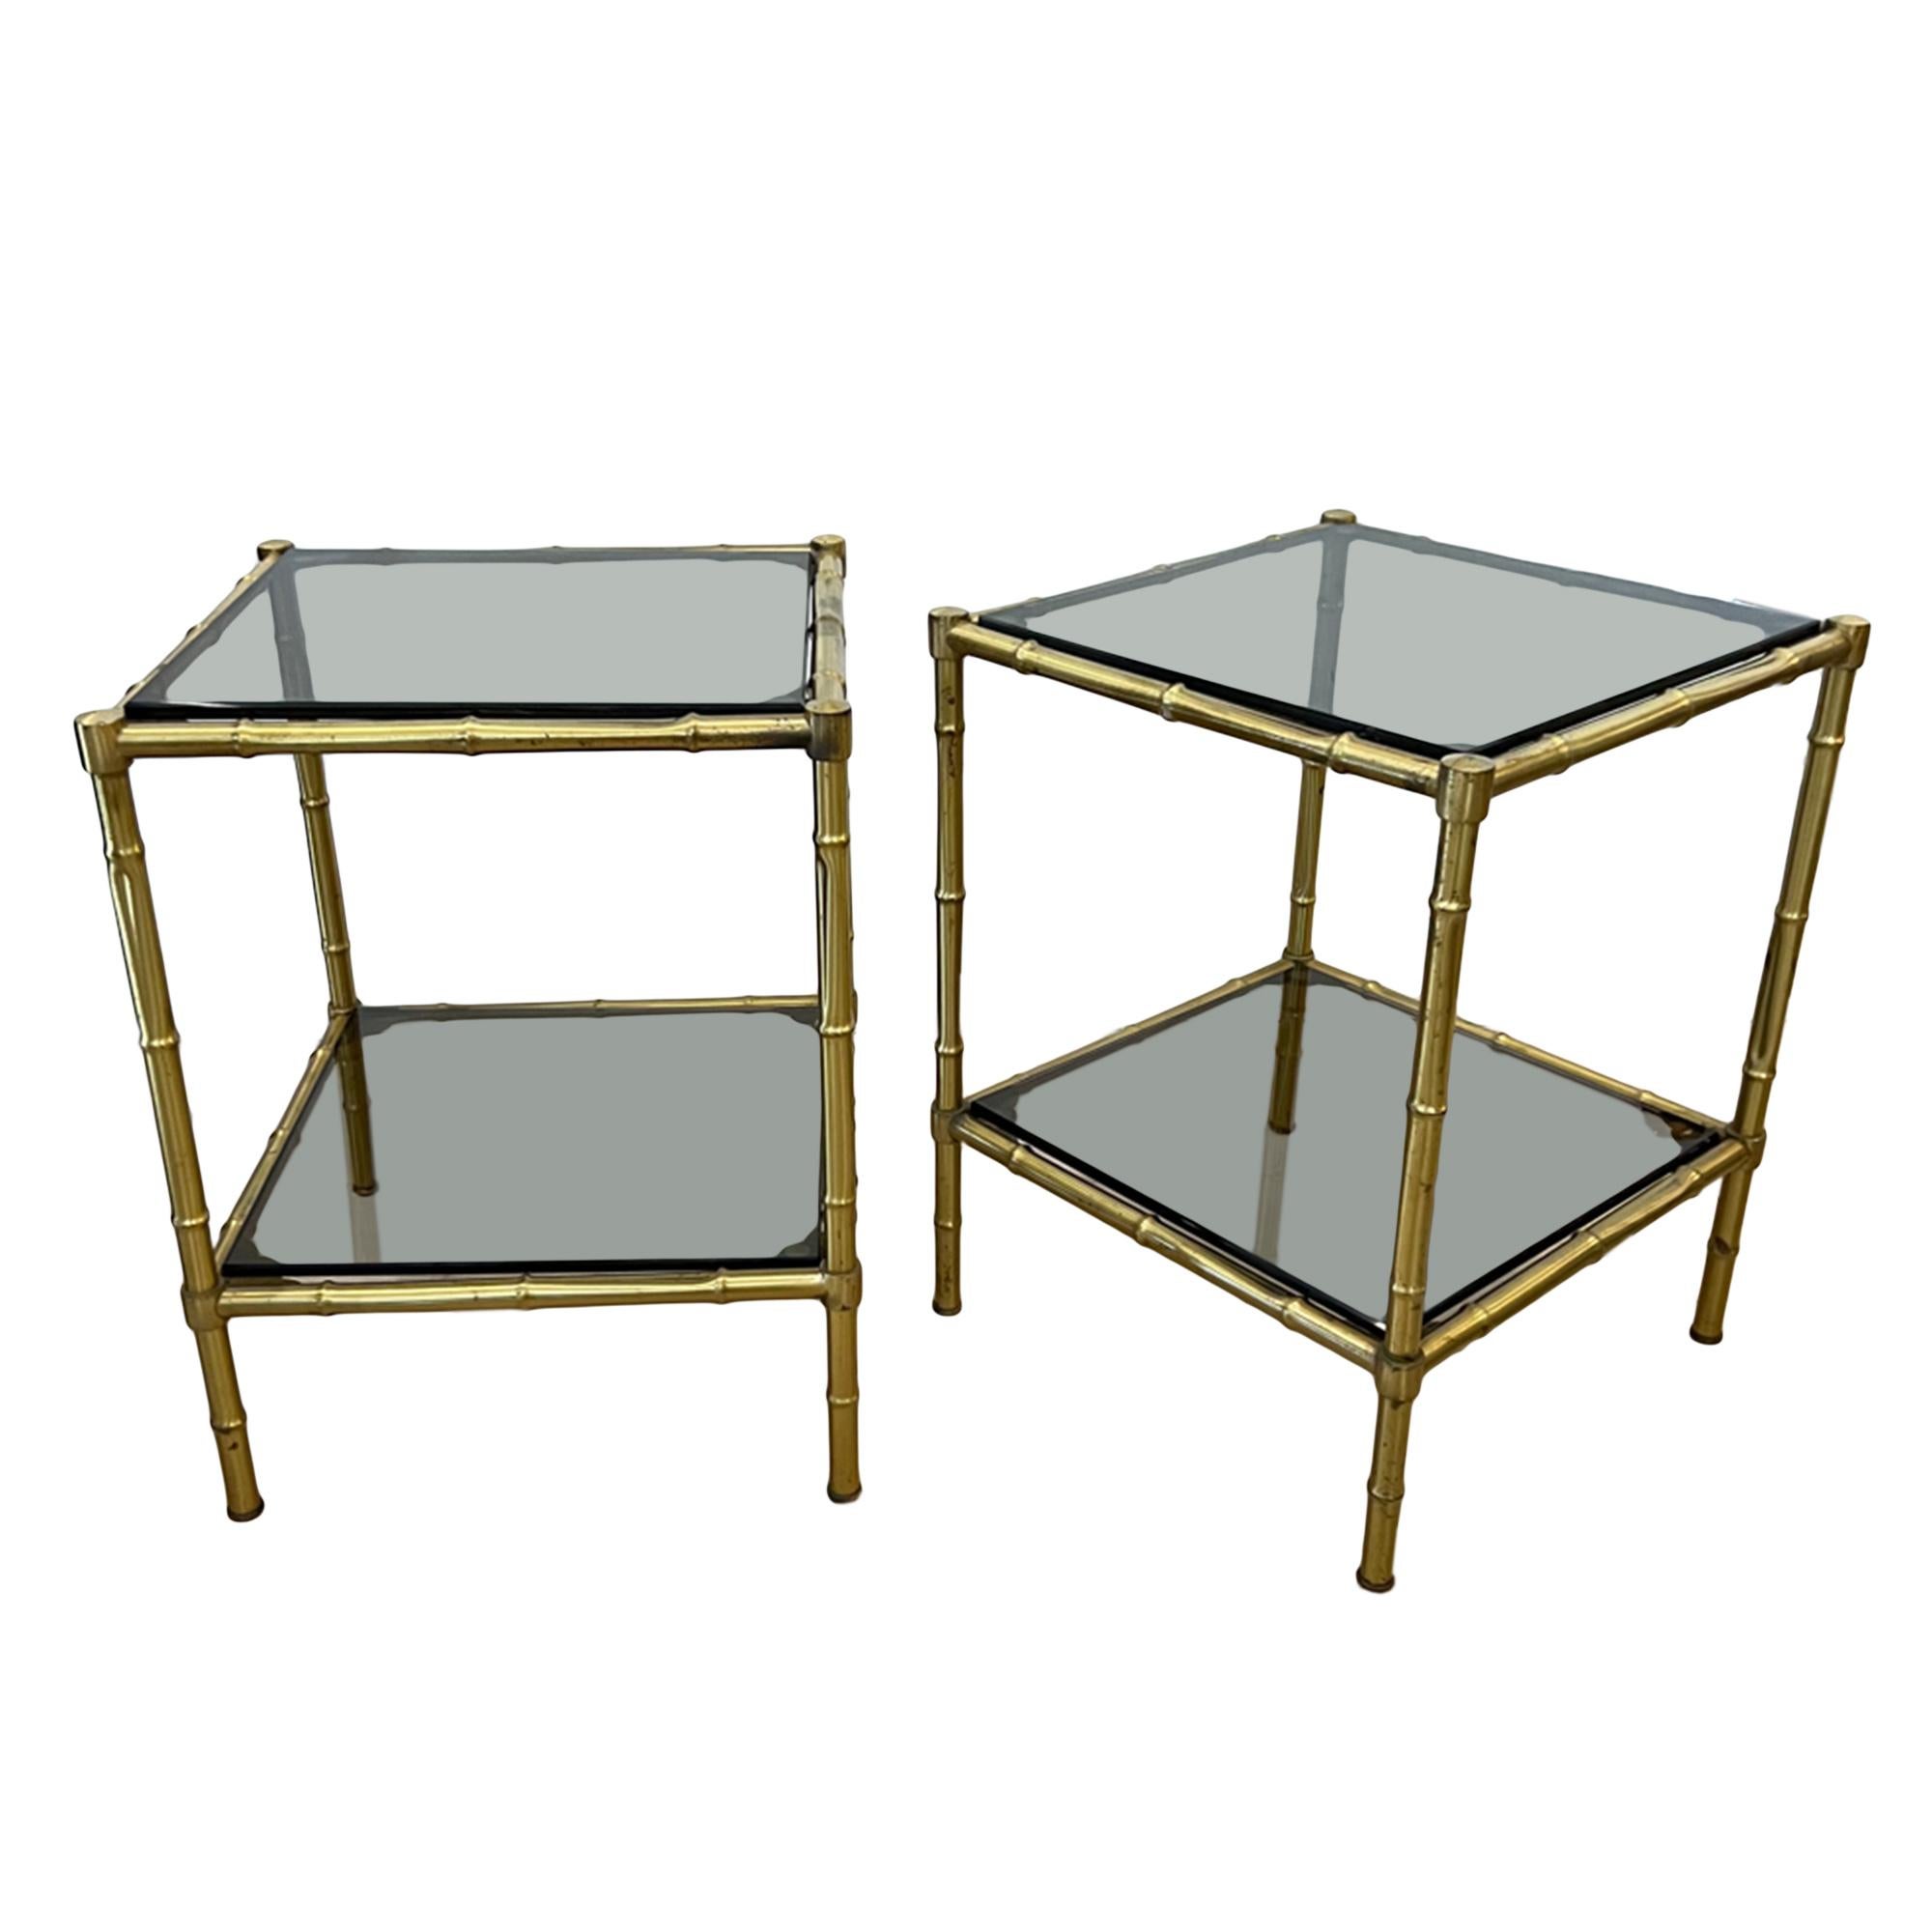 These lovely neat pair of brass faux bamboo side tables were made in France in the 1970s. With the original smoked glass - a classic design of the midcentury period. 

Perfect for a smaller reception room or study.